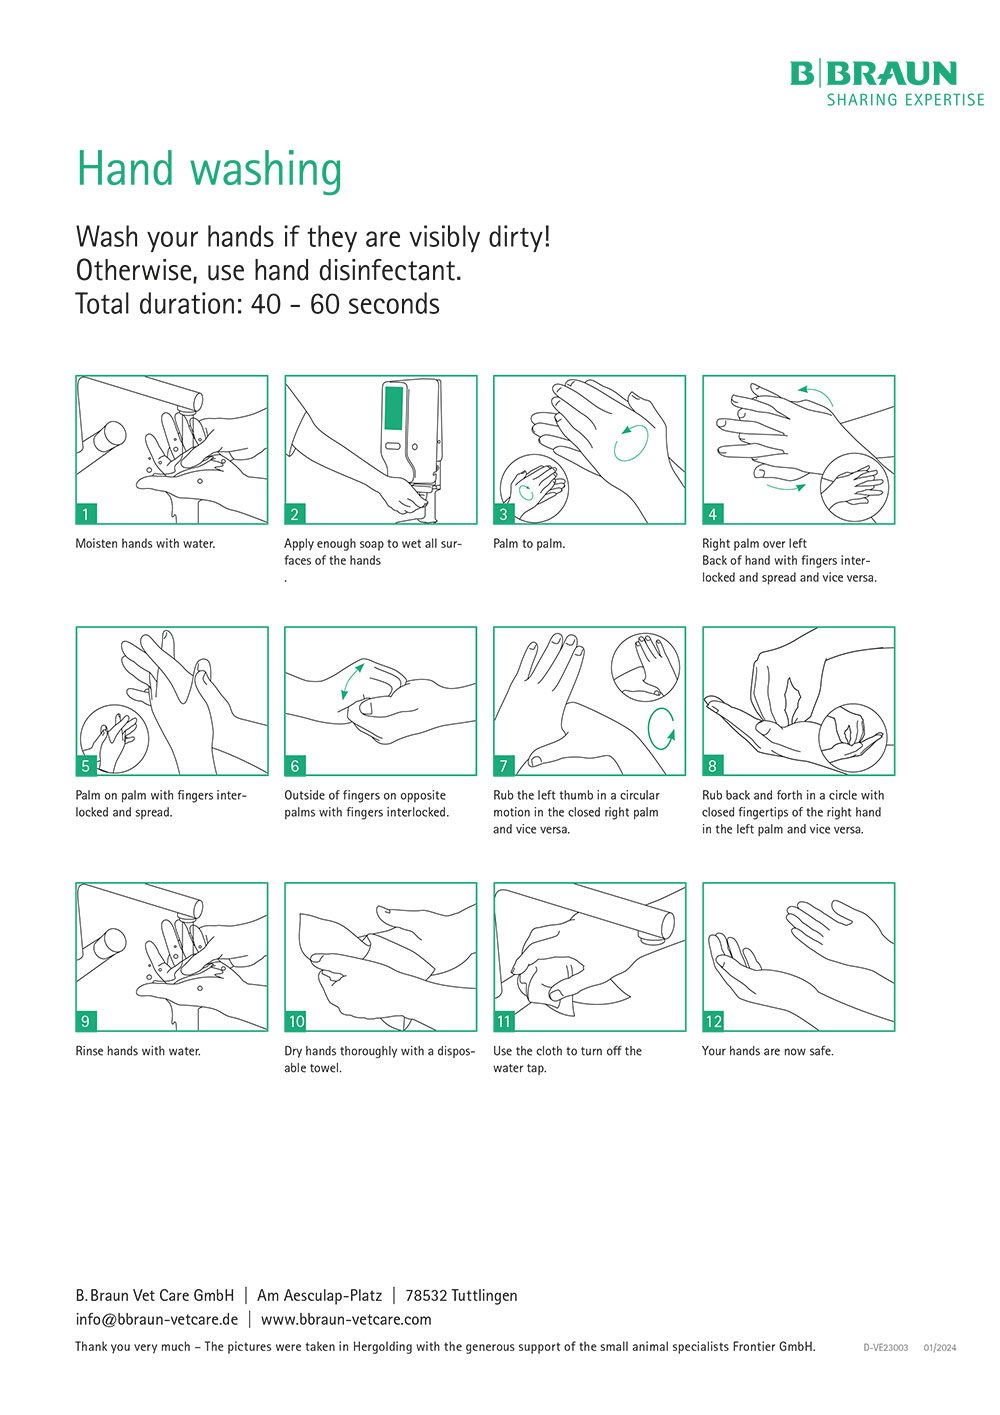 Step-by-step guide: Hand washing